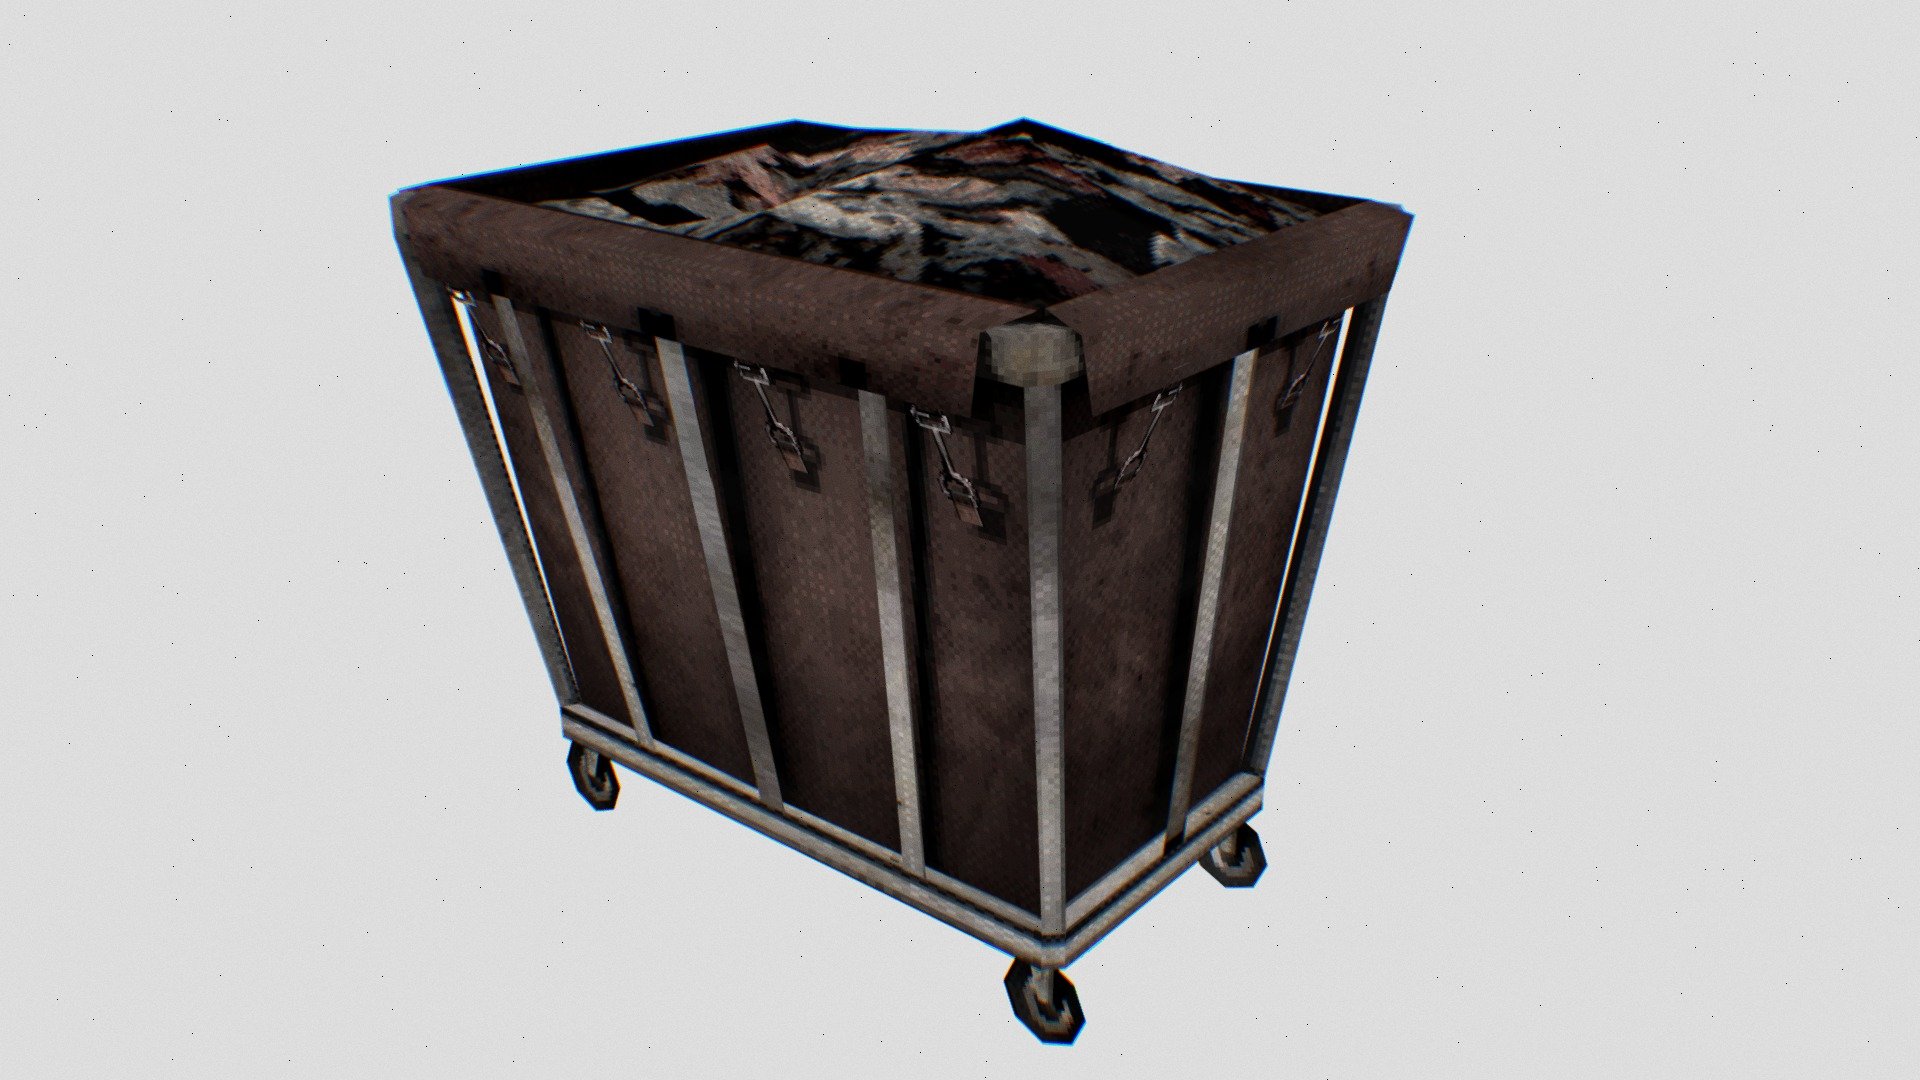 Airing my dirty laudry. 

Designed for retro inspired projects or mobile games.

My YouTube channel where I document my game dev journey - https://www.youtube.com/@AaronMYoung Contact me on - Aaronmyoung94@gmail.com - PS1 Style Asset - Dirty Laundry Cart - 3D model by AaronMYoung 3d model